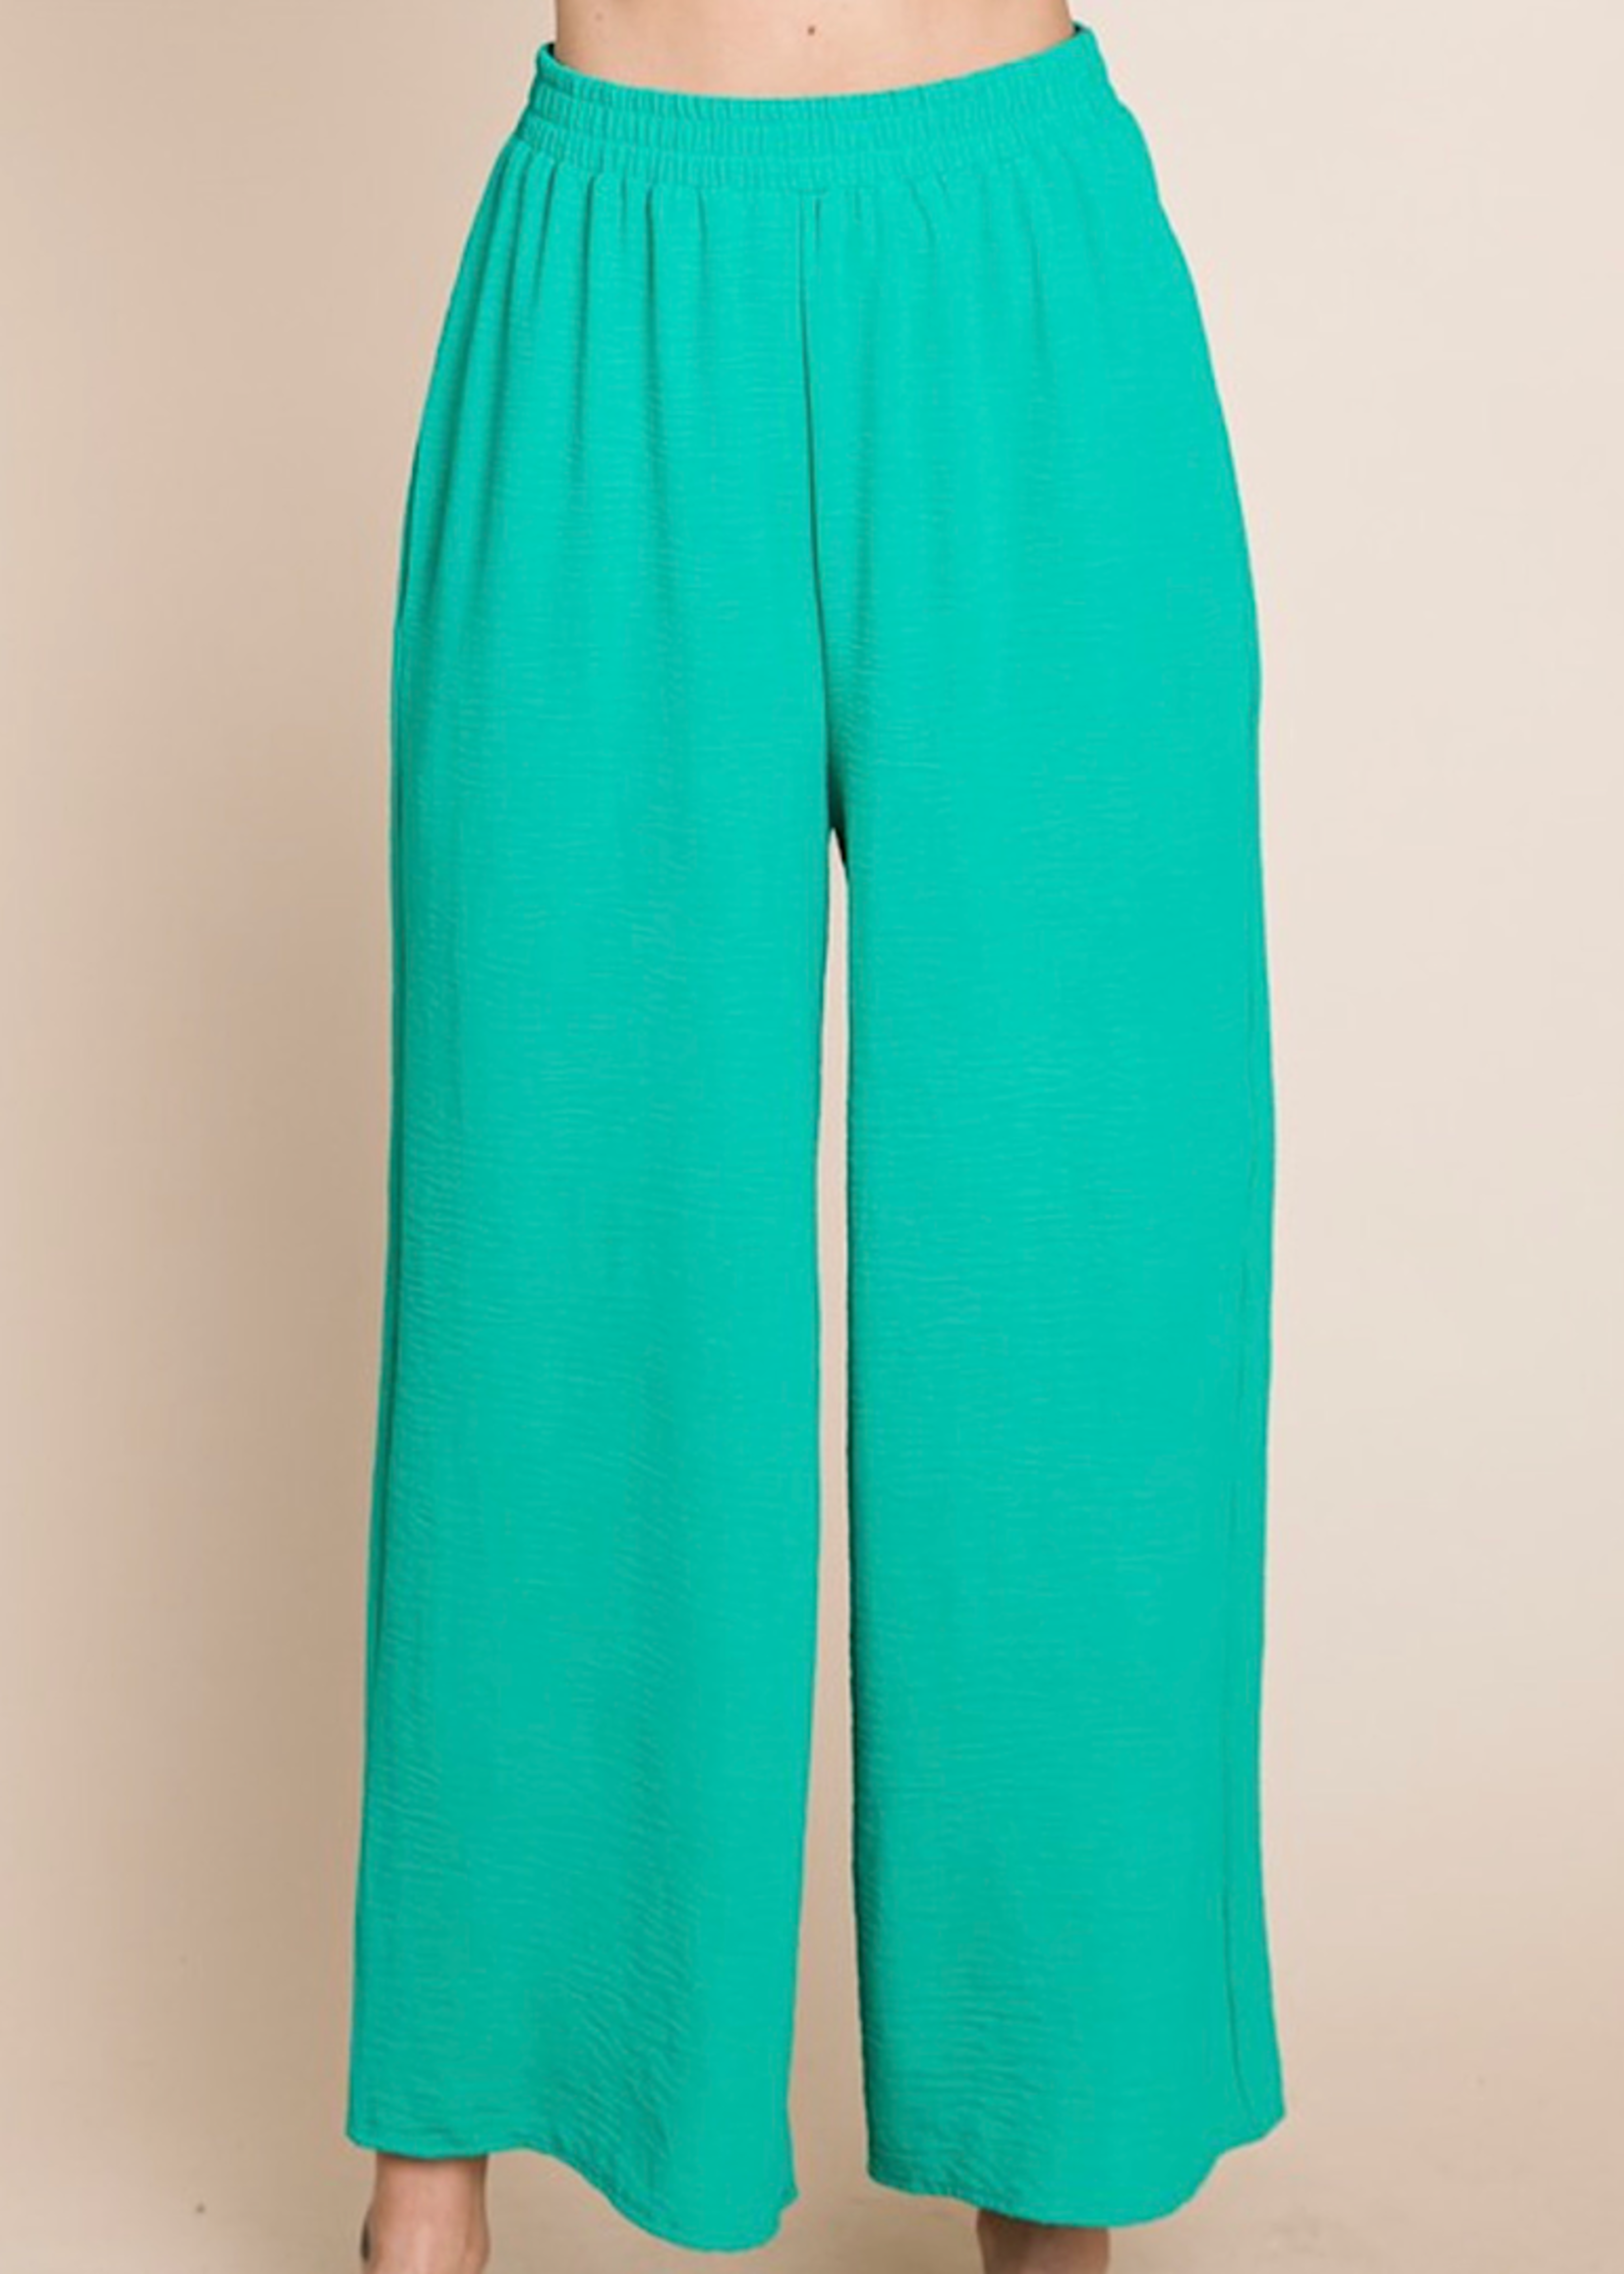 Kelly Green Air Flow Pants With Side Pocket